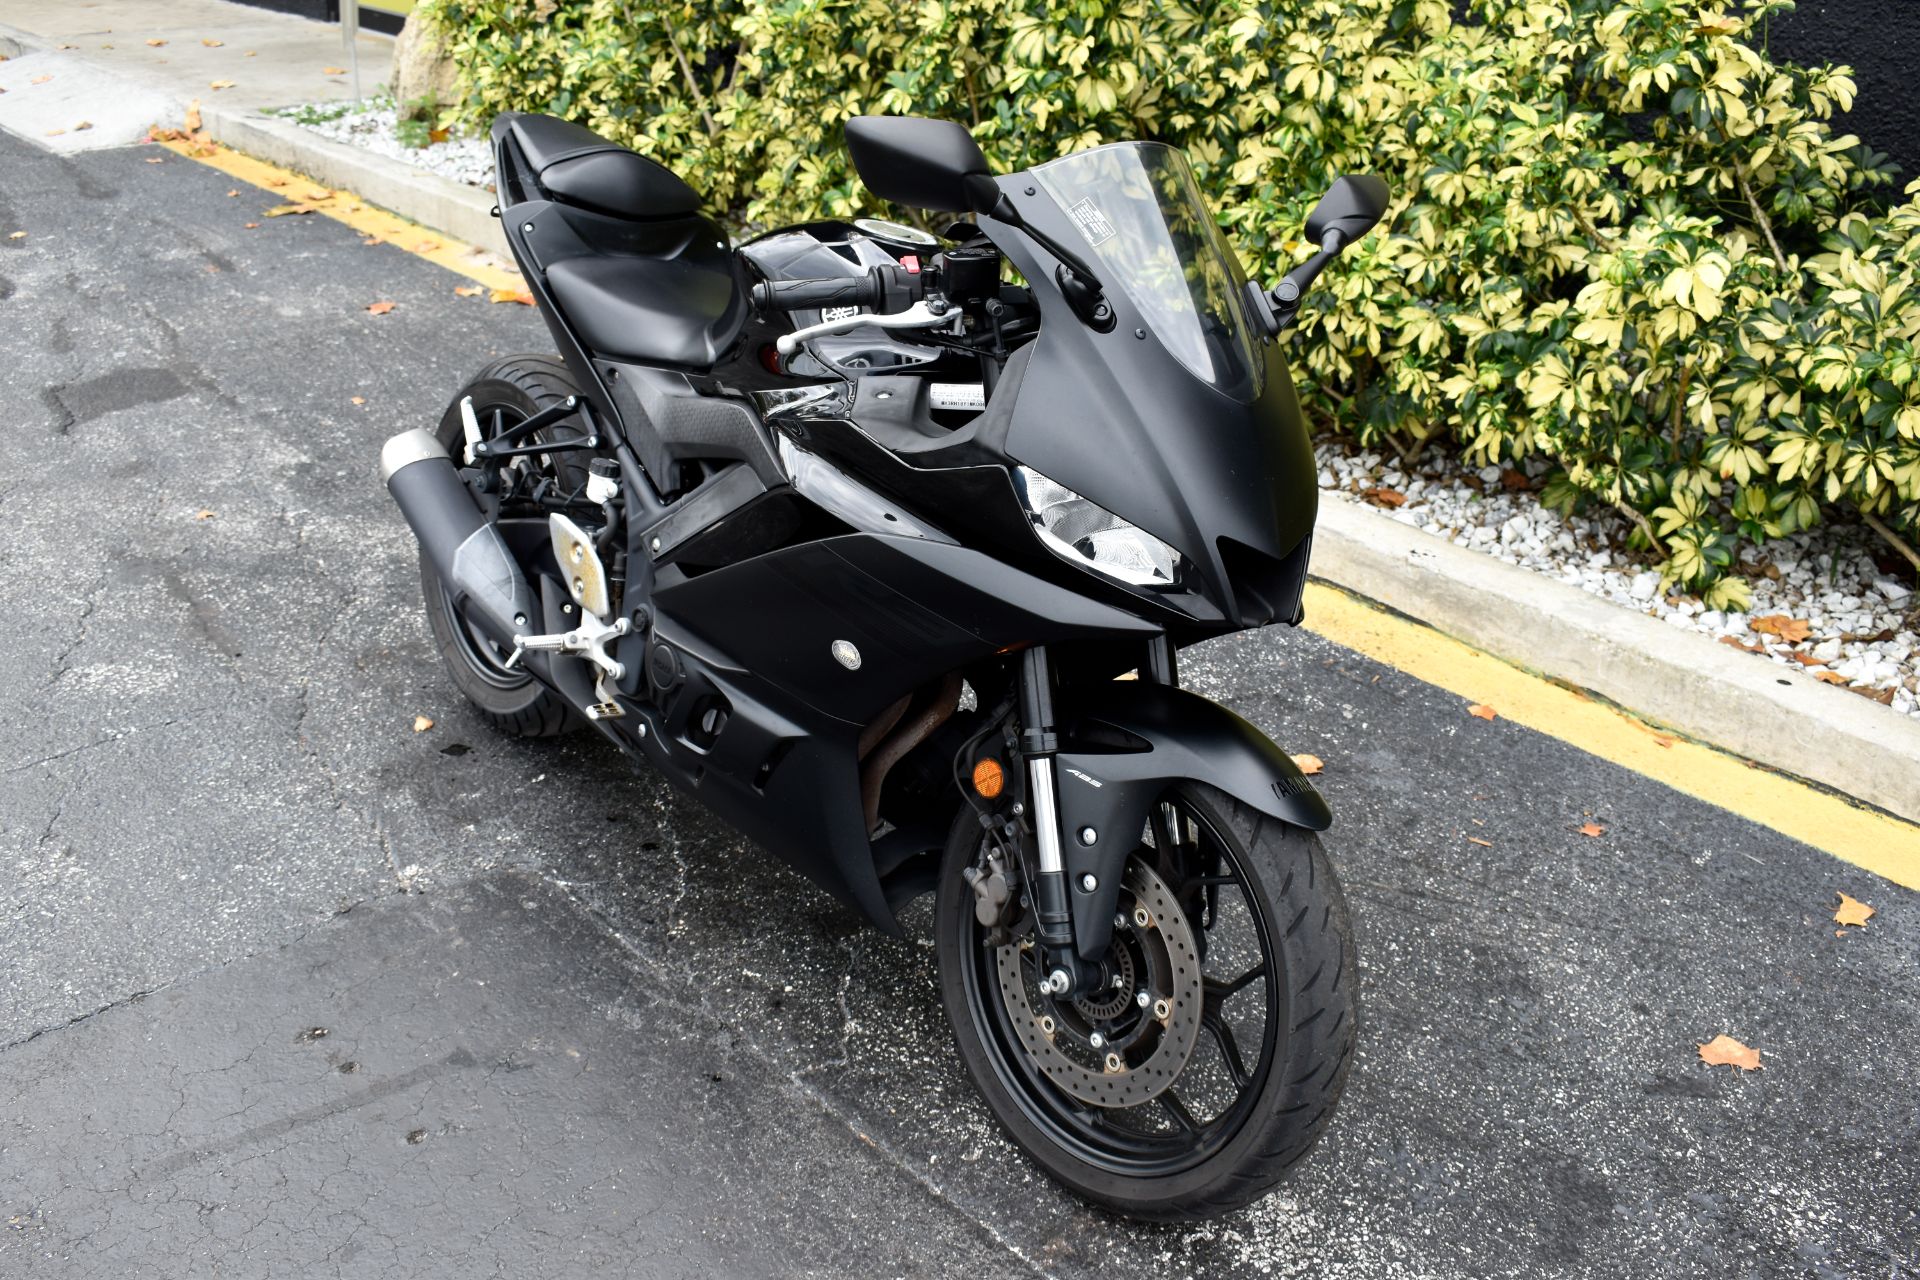 2021 Yamaha YZF-R3 ABS in Jacksonville, Florida - Photo 6